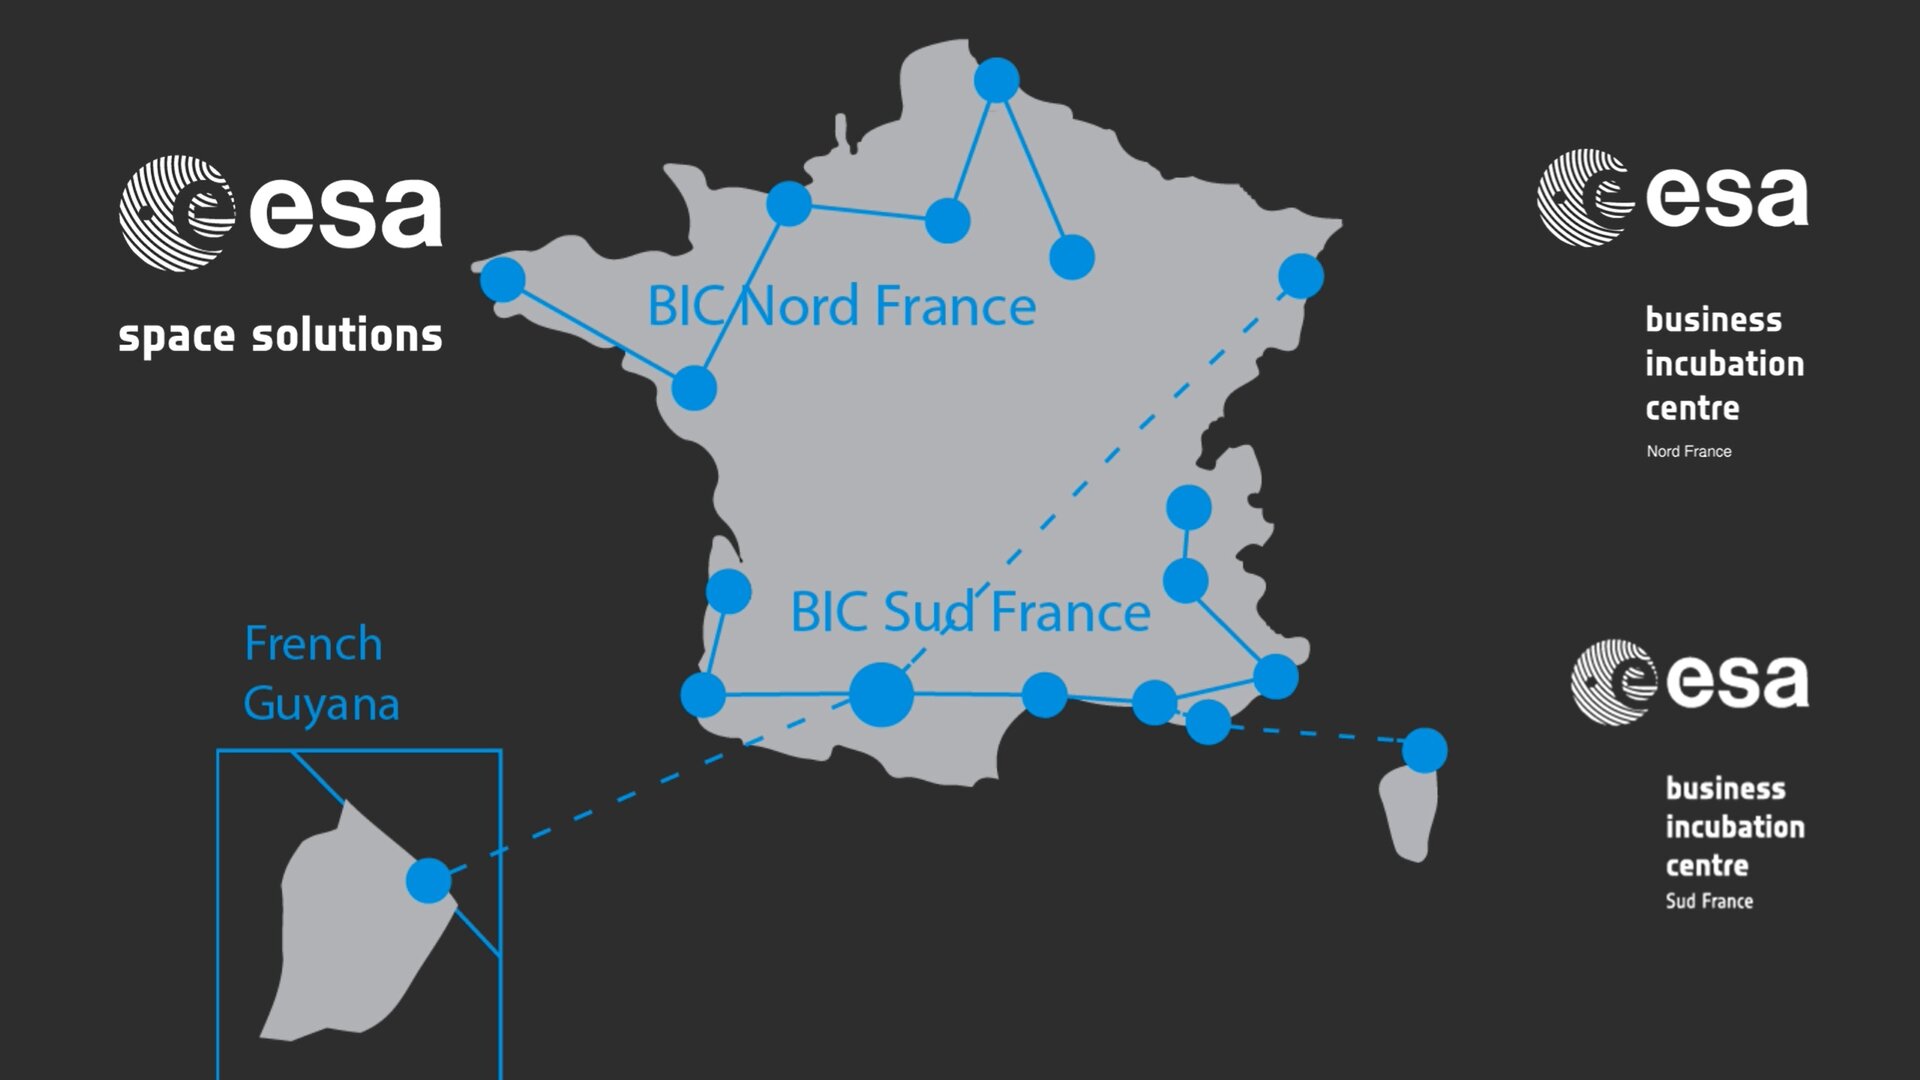 ESA BIC Nord France opening and ESA BIC Sud France renewal contract 28 June 2018